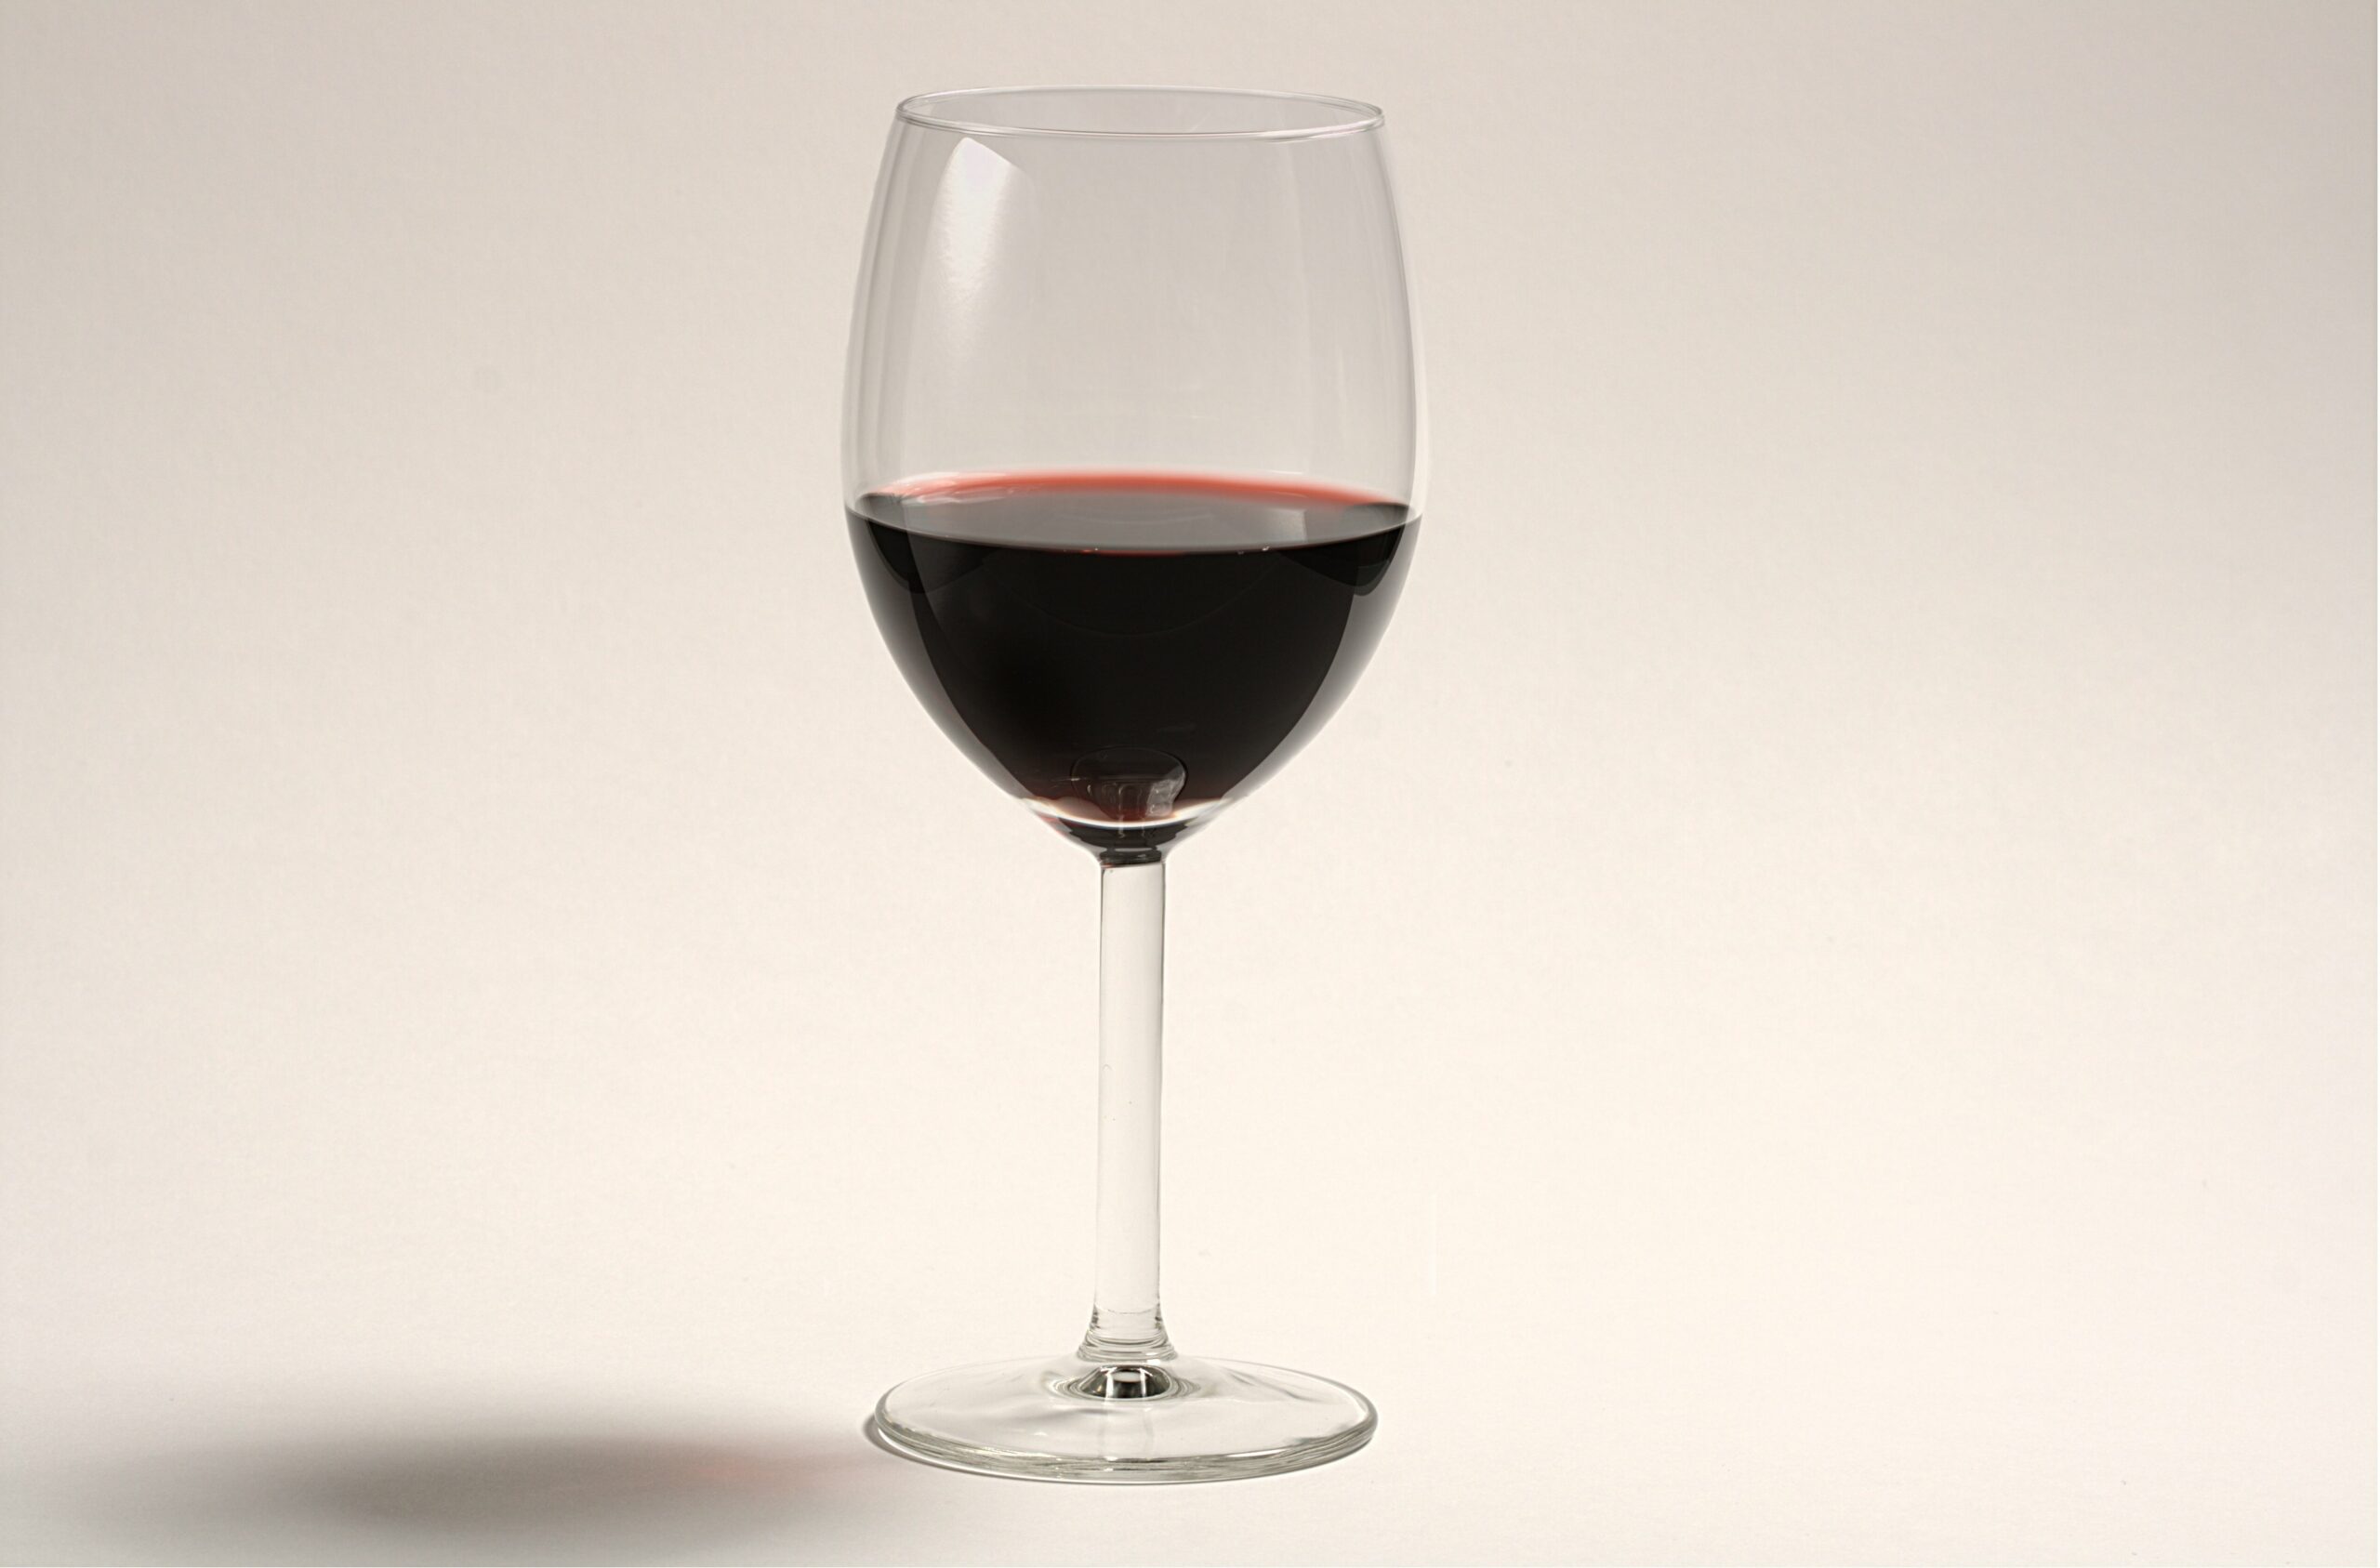 Cancer-Fighting Compound Found In Wine Is More Effective At Smaller Doses